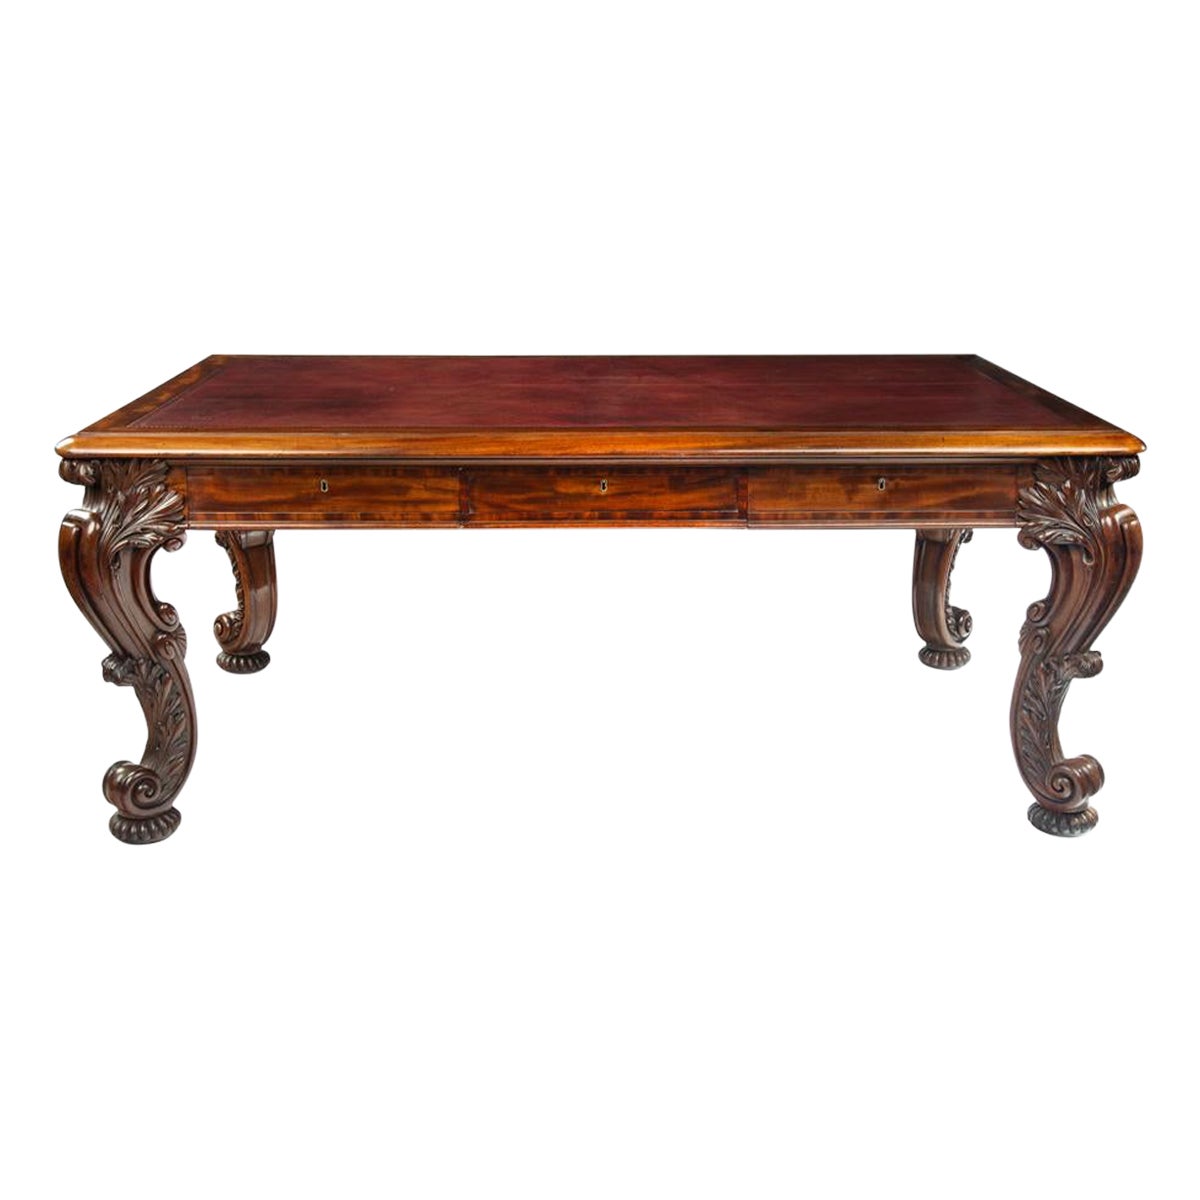 A large late Regency mahogany partner’s library table attributed to Gillows